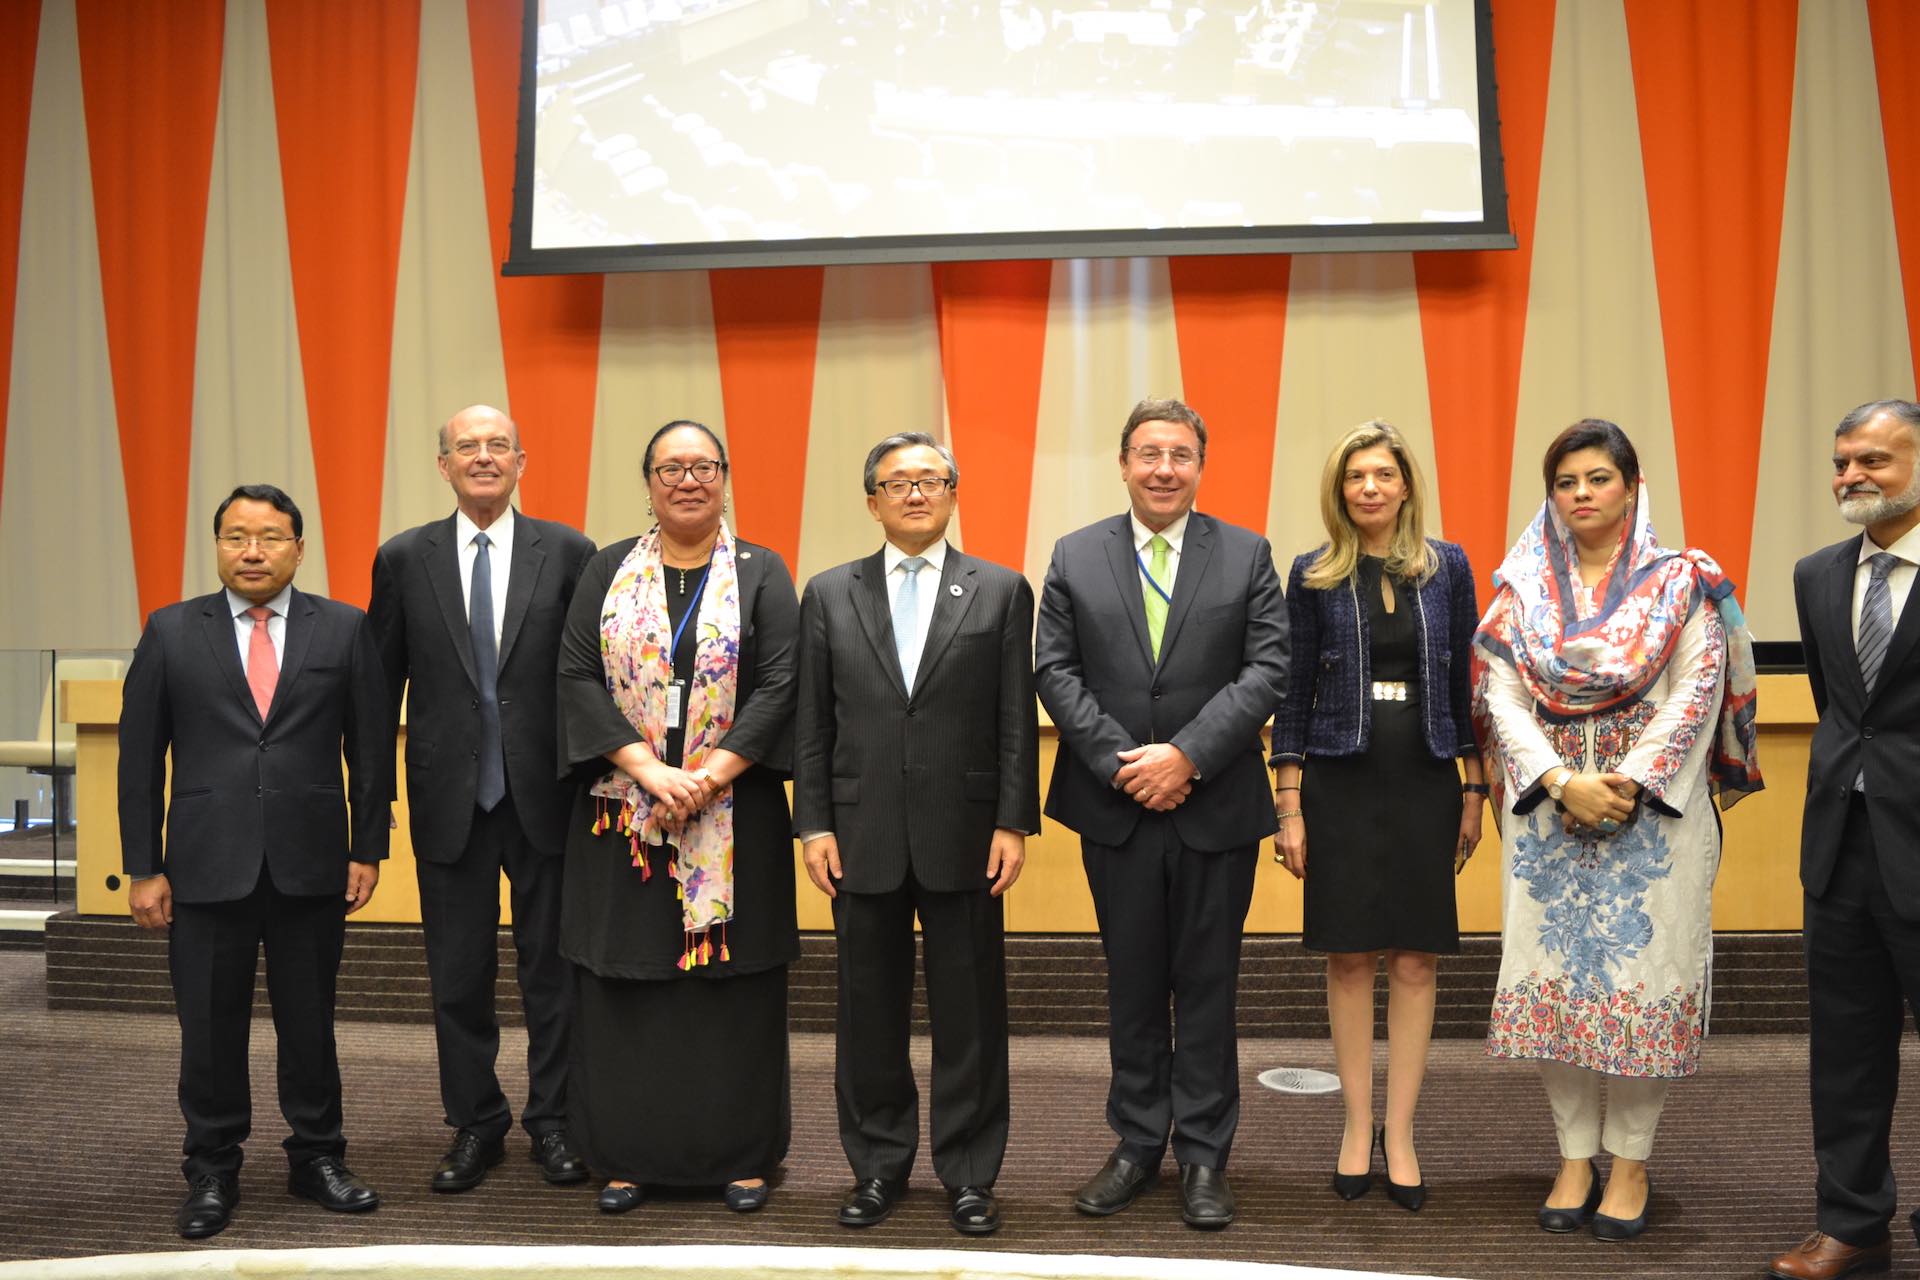 Picture taken at the 23-24 May 2019 HLPF conference